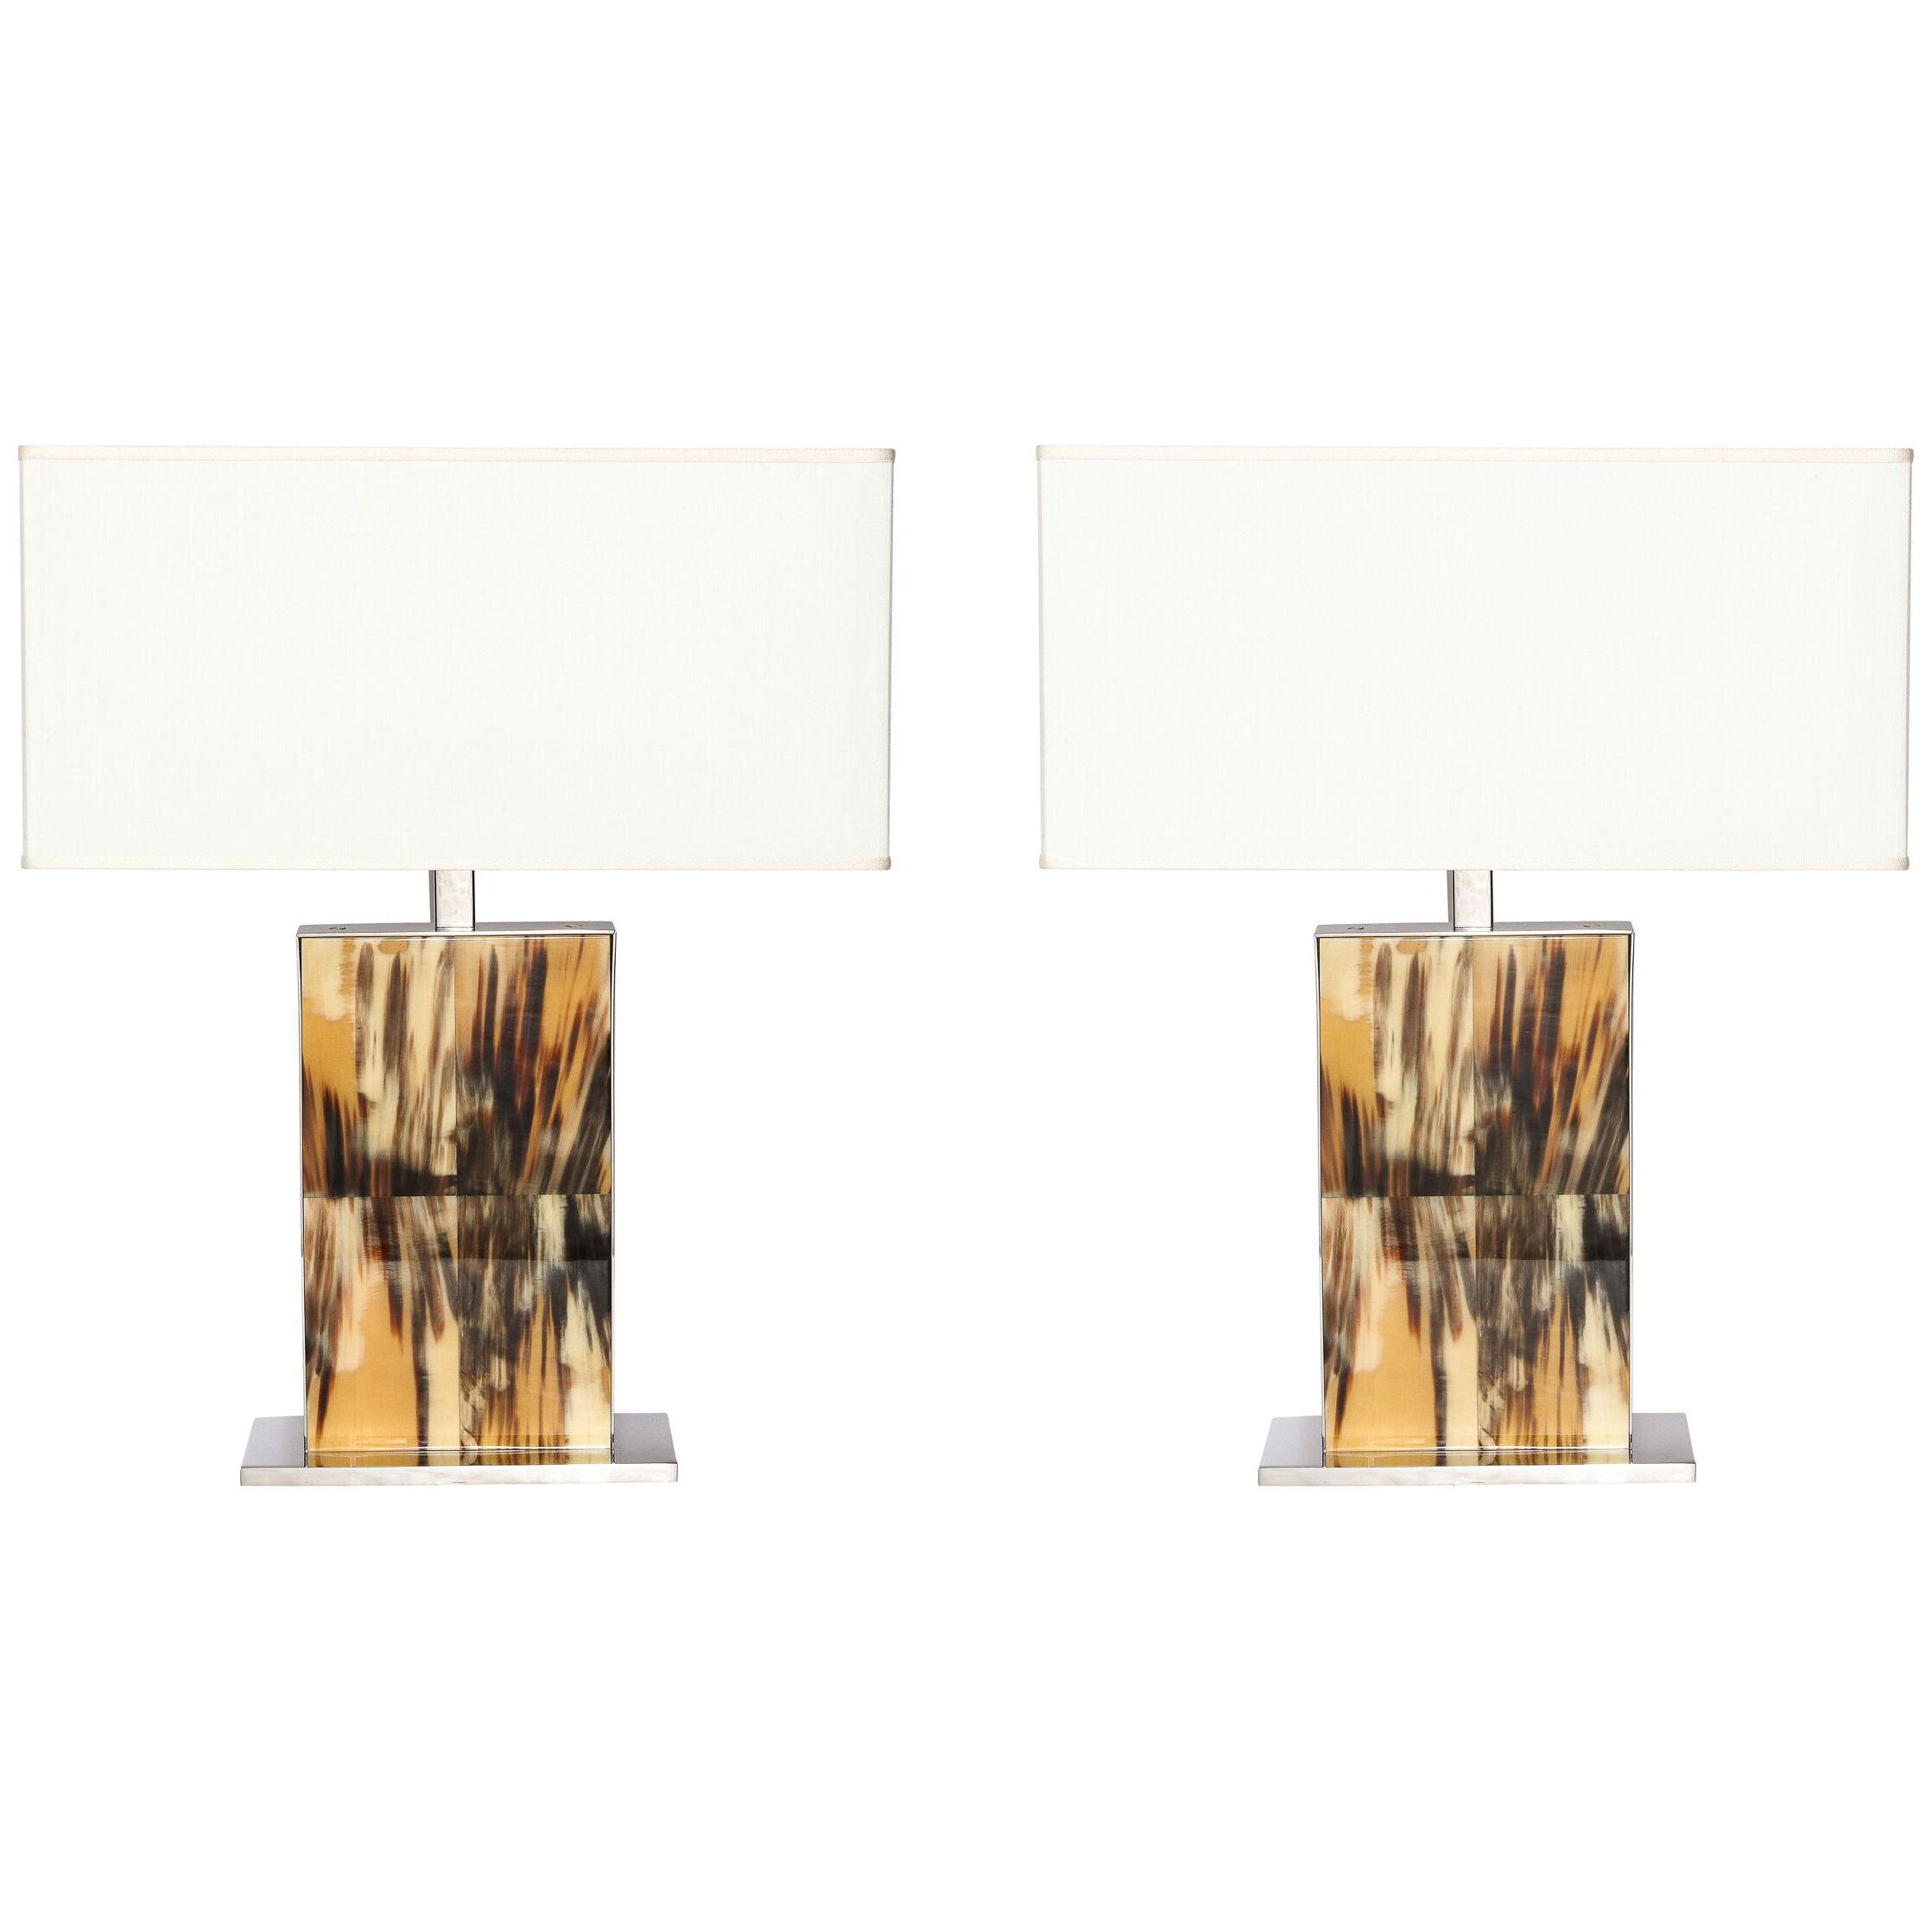 Modernist Rectilinear Table Lamps in Paneled Horn and Polished Nickel